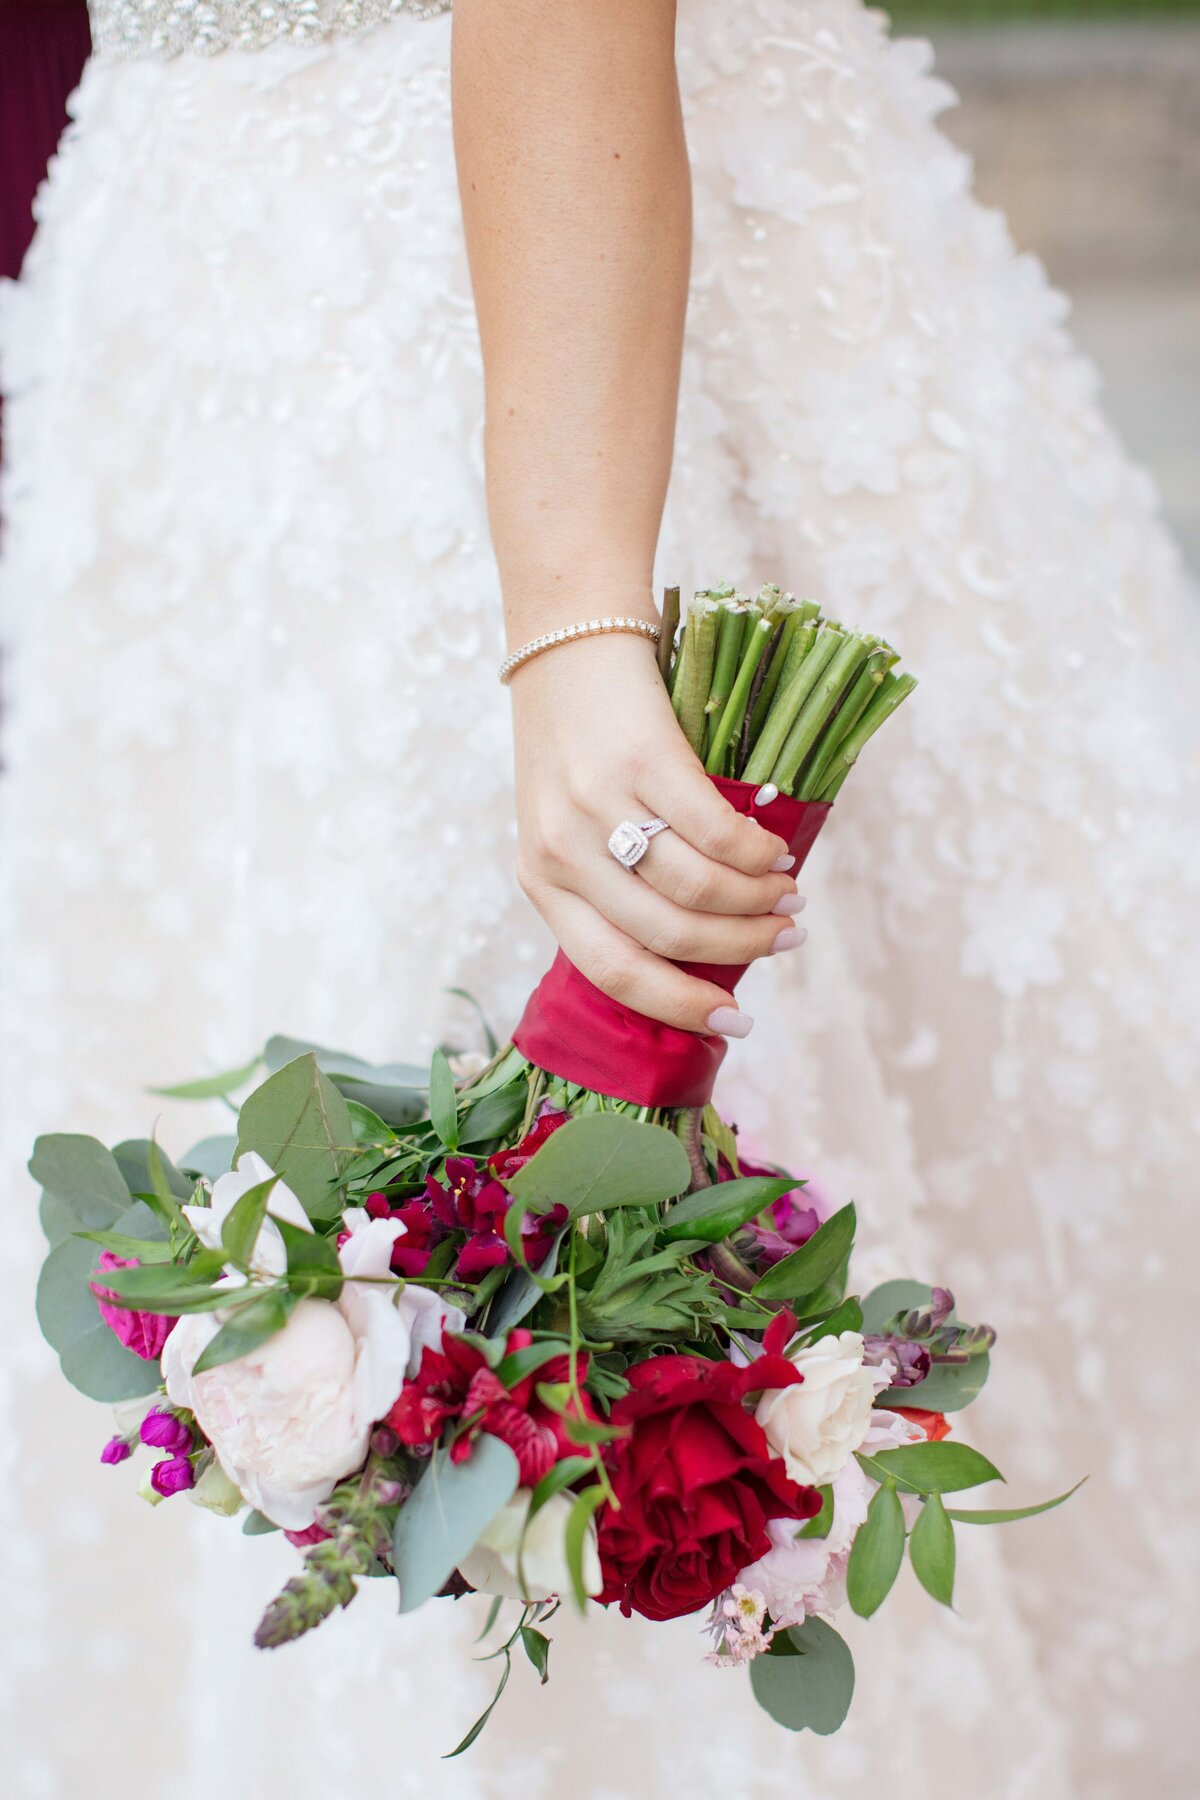 red and white wedding bouquet held at the side of gown showing ring with halo diamonds in New Braunfels Texasby Firefly Photography